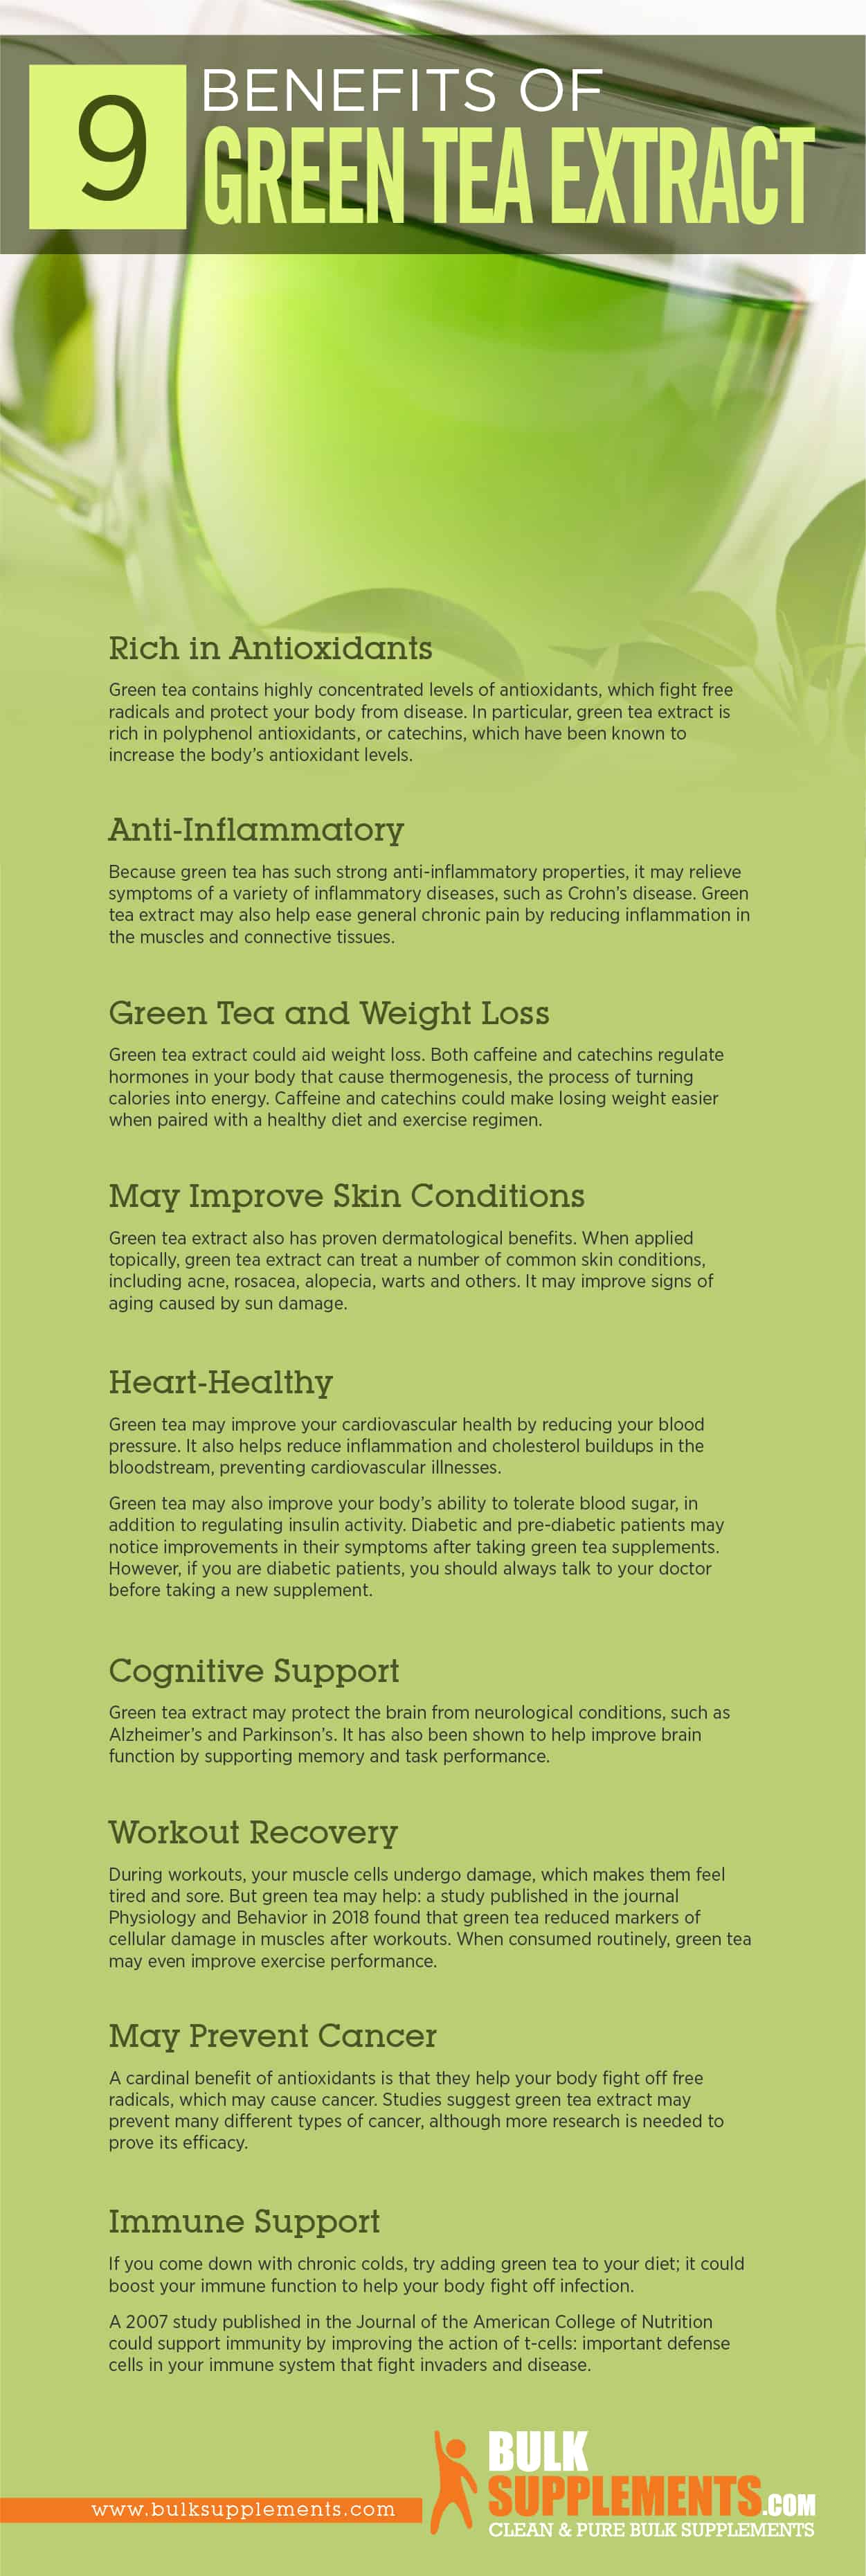 green tea extract benefits, side effects and dosage